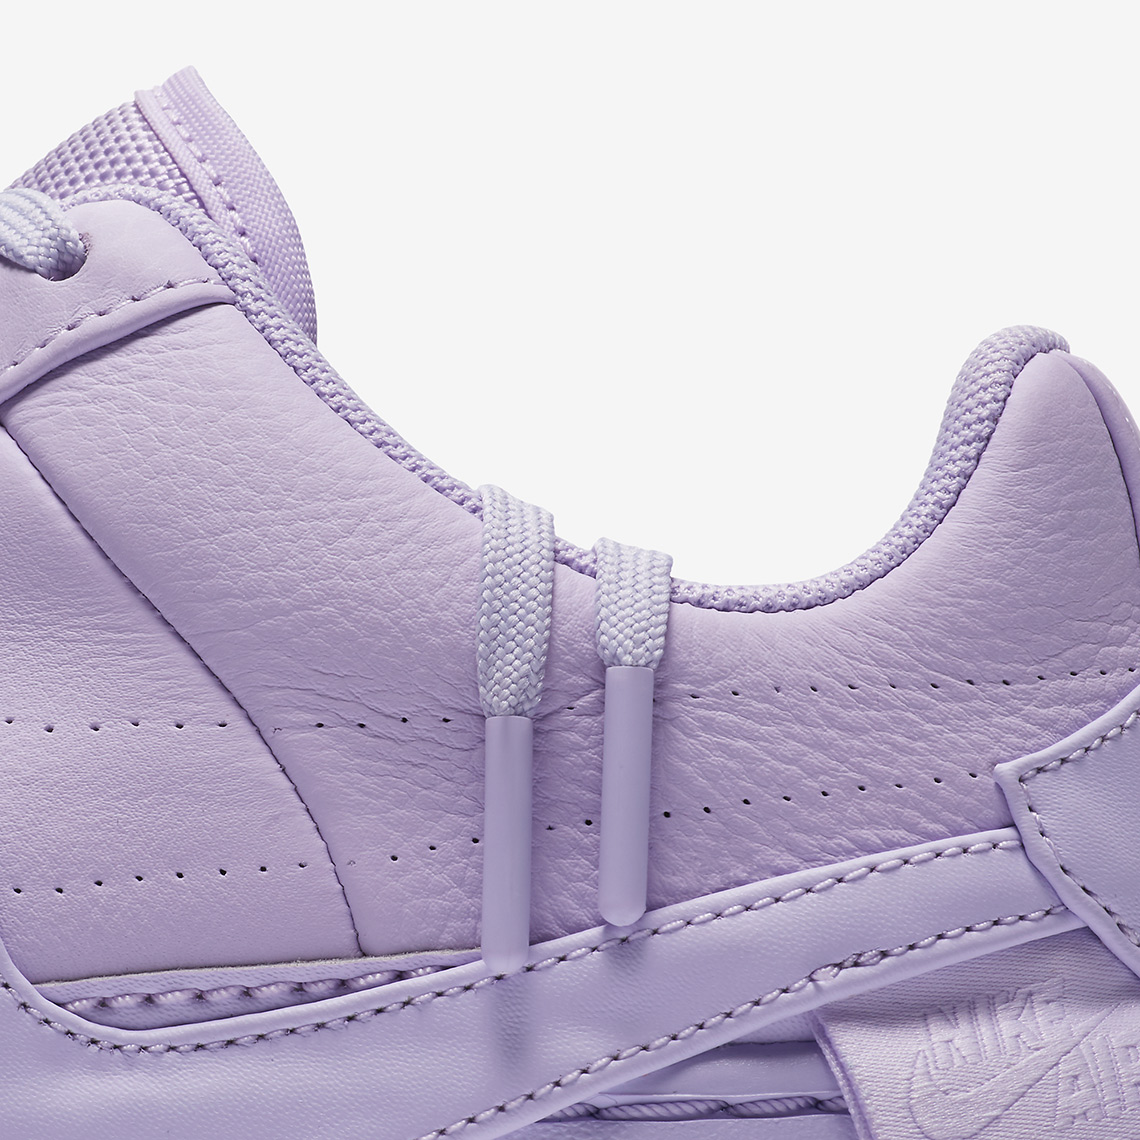 Nike Air Force 1 Low Jester Violet Mist Ao1220 500 1